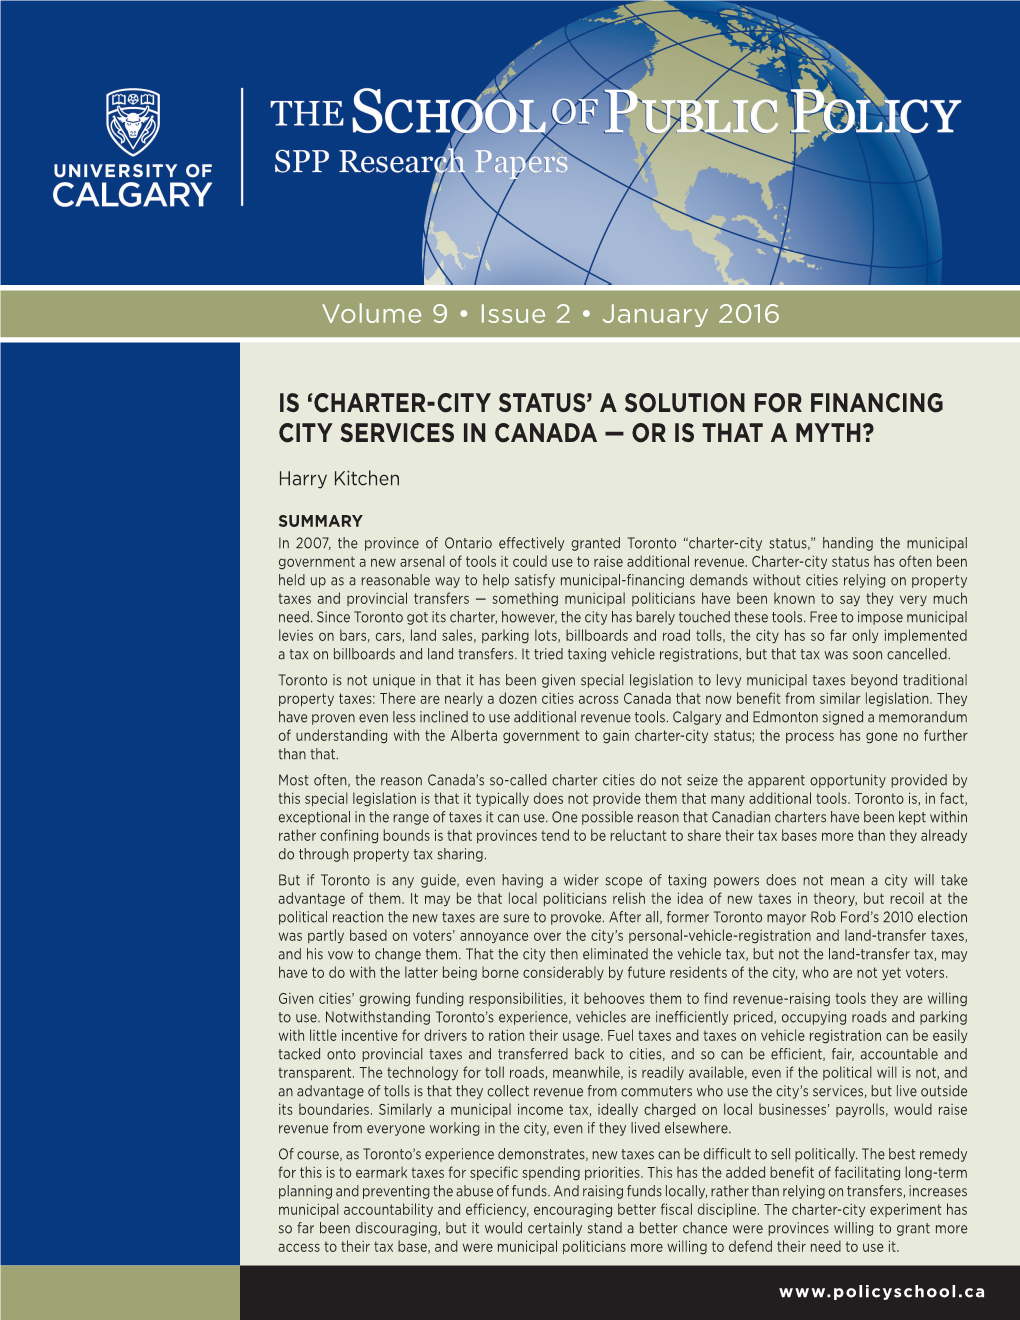 'Charter-City Status' a Solution for Financing City Services in Canada